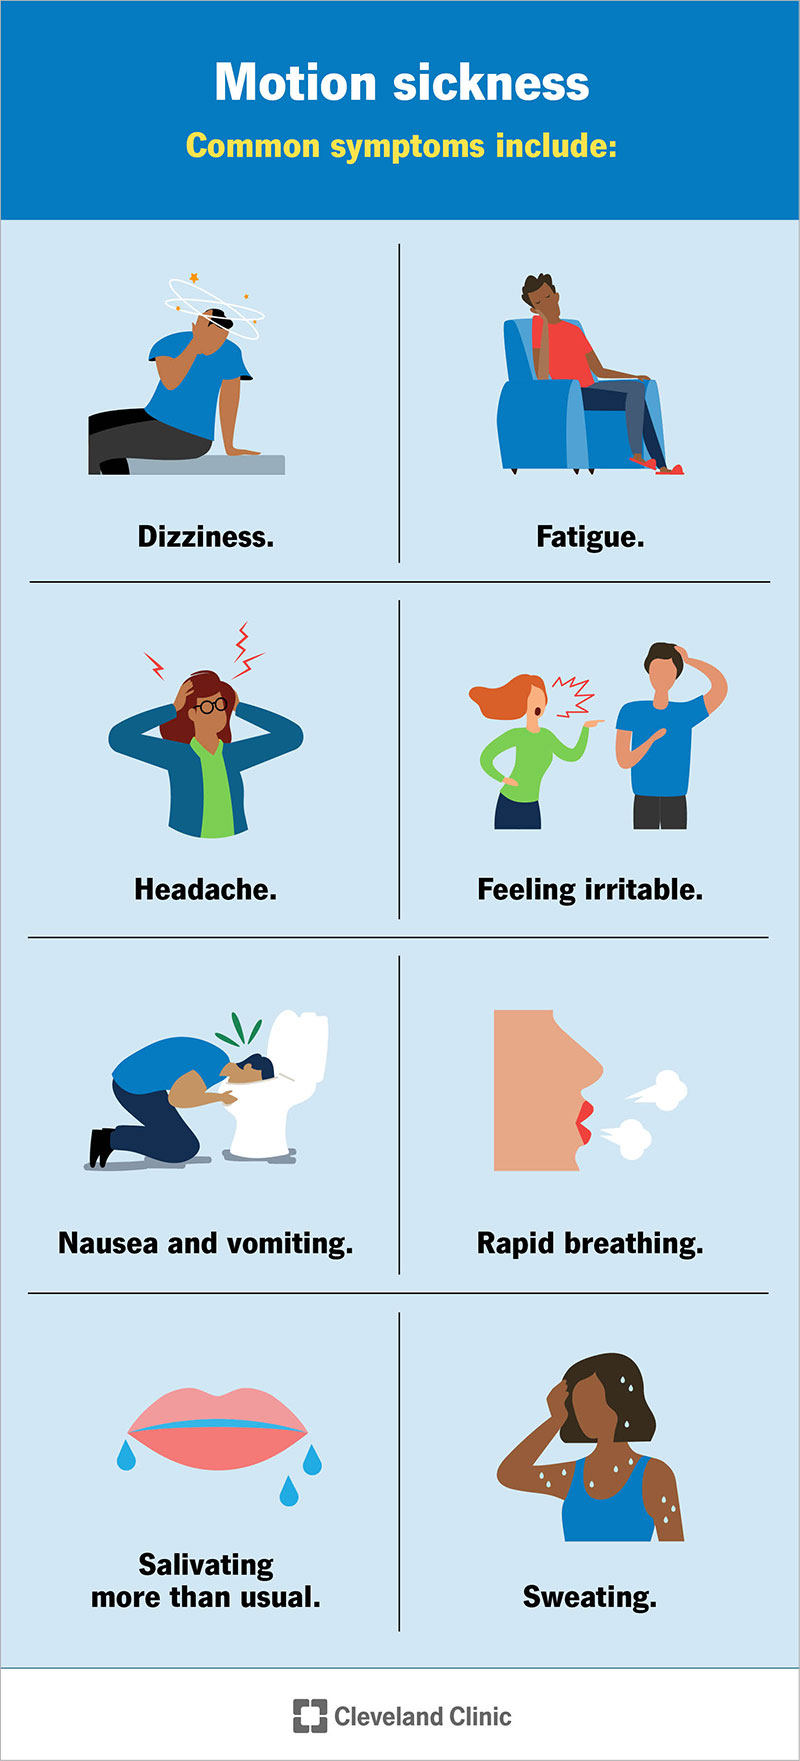 Common motion sickness symptoms are nausea and vomiting, salivating a lot, fatigue, rapid breathing and sweating.